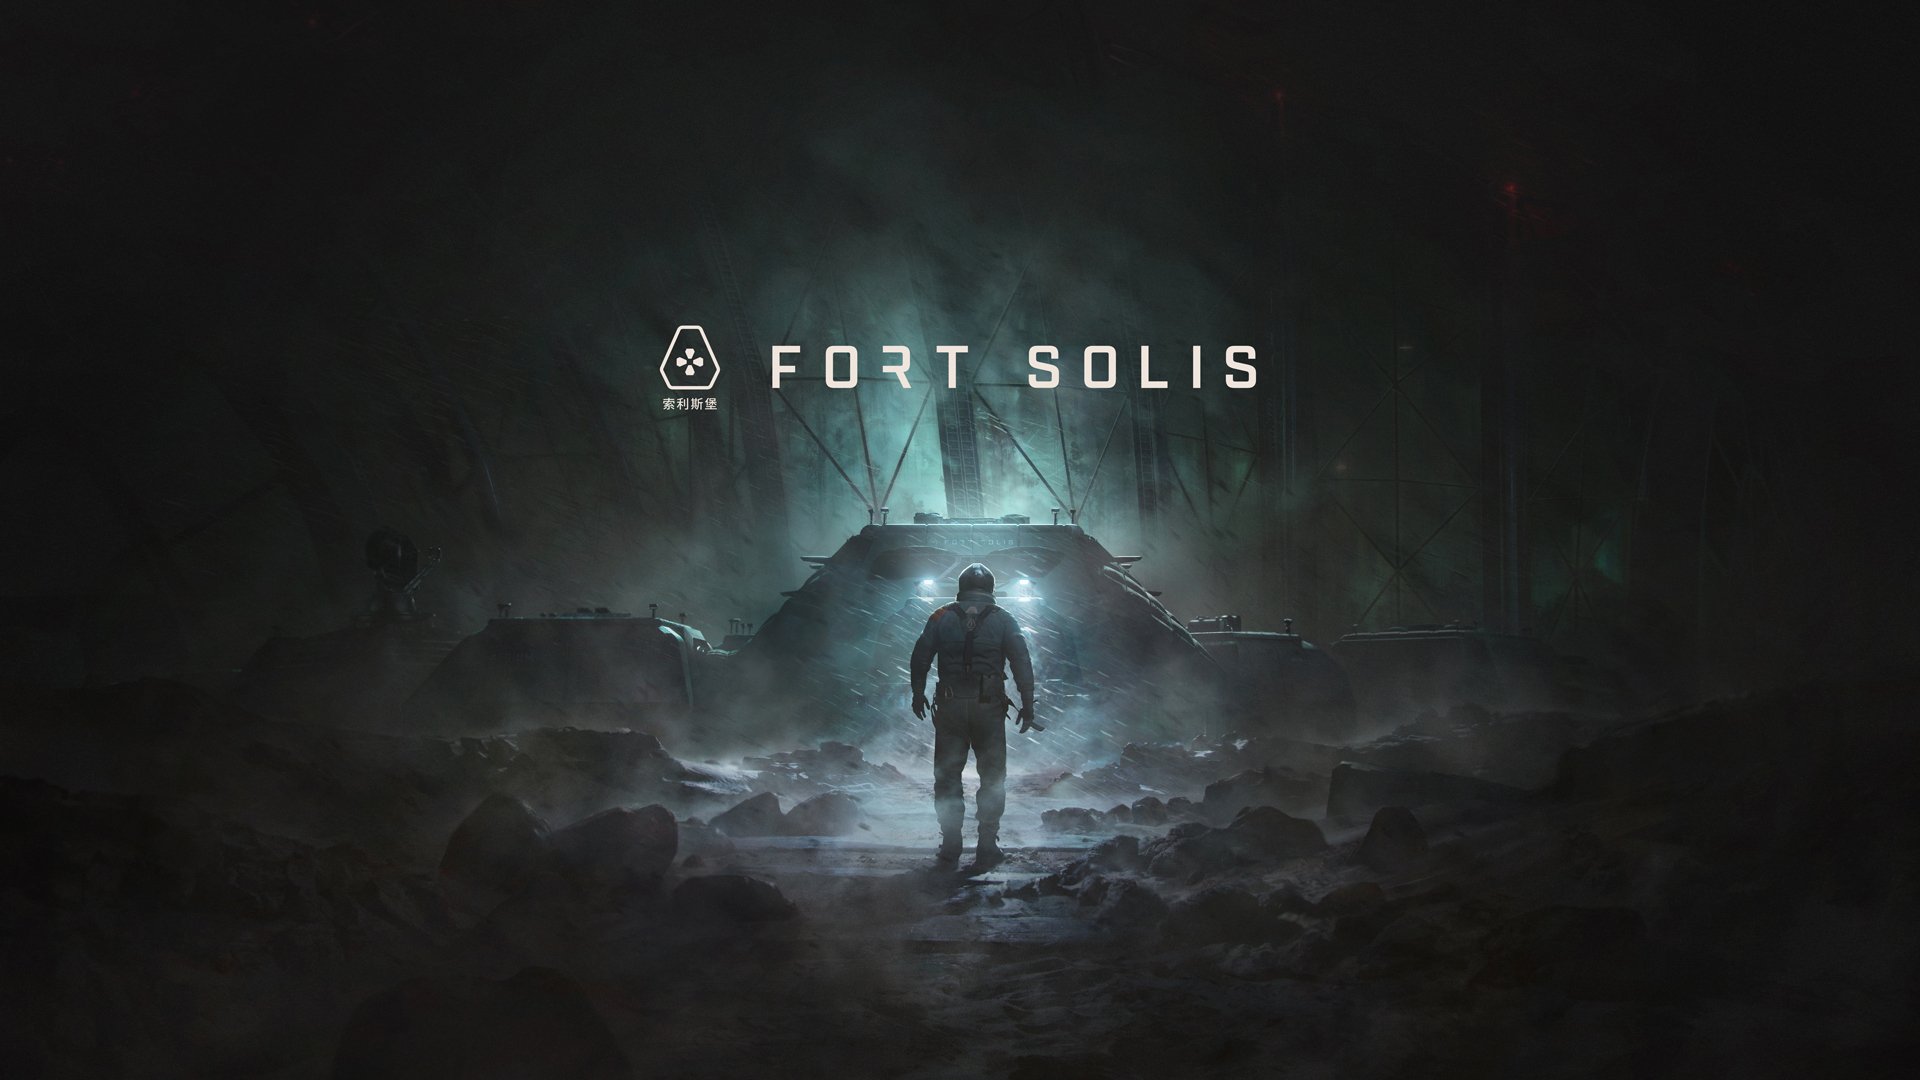 #
      Fort Solis launches this summer, published by Dear Villagers